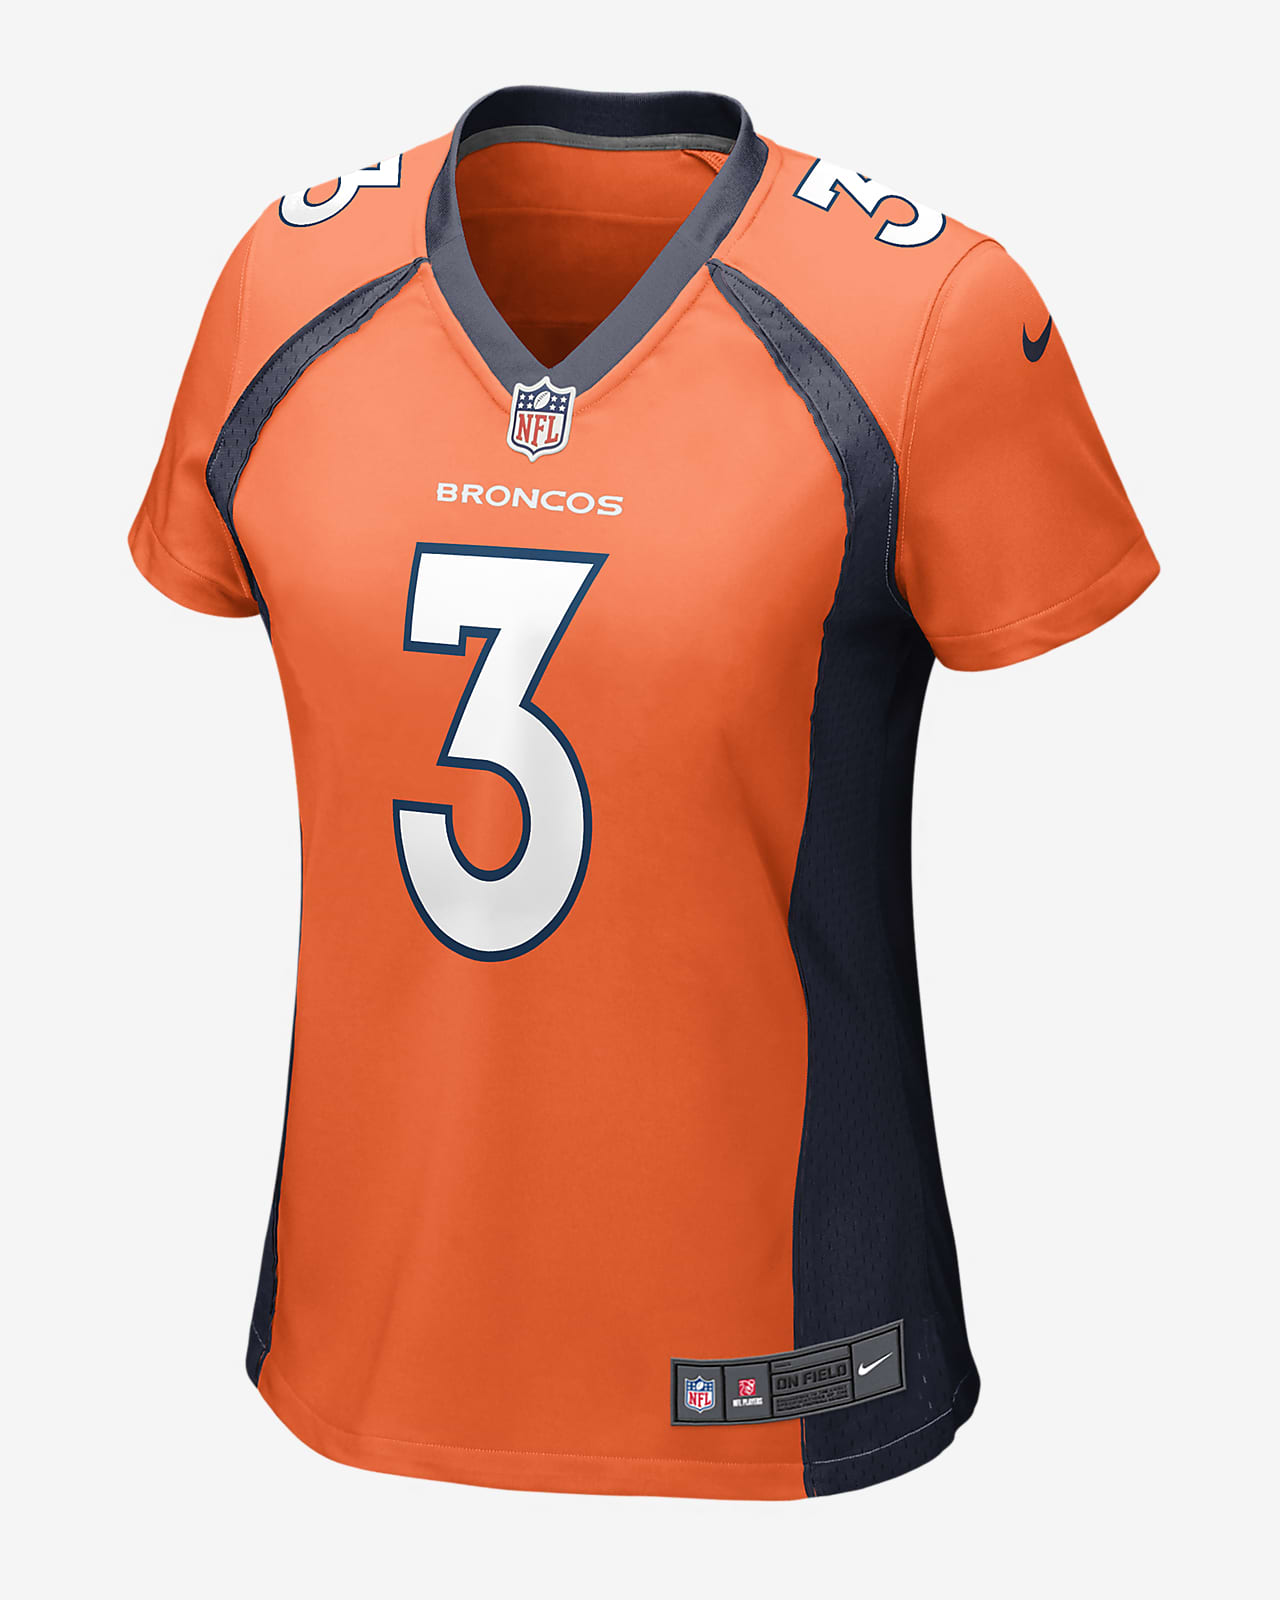 Russell Wilson Denver Broncos Jersey For Sale